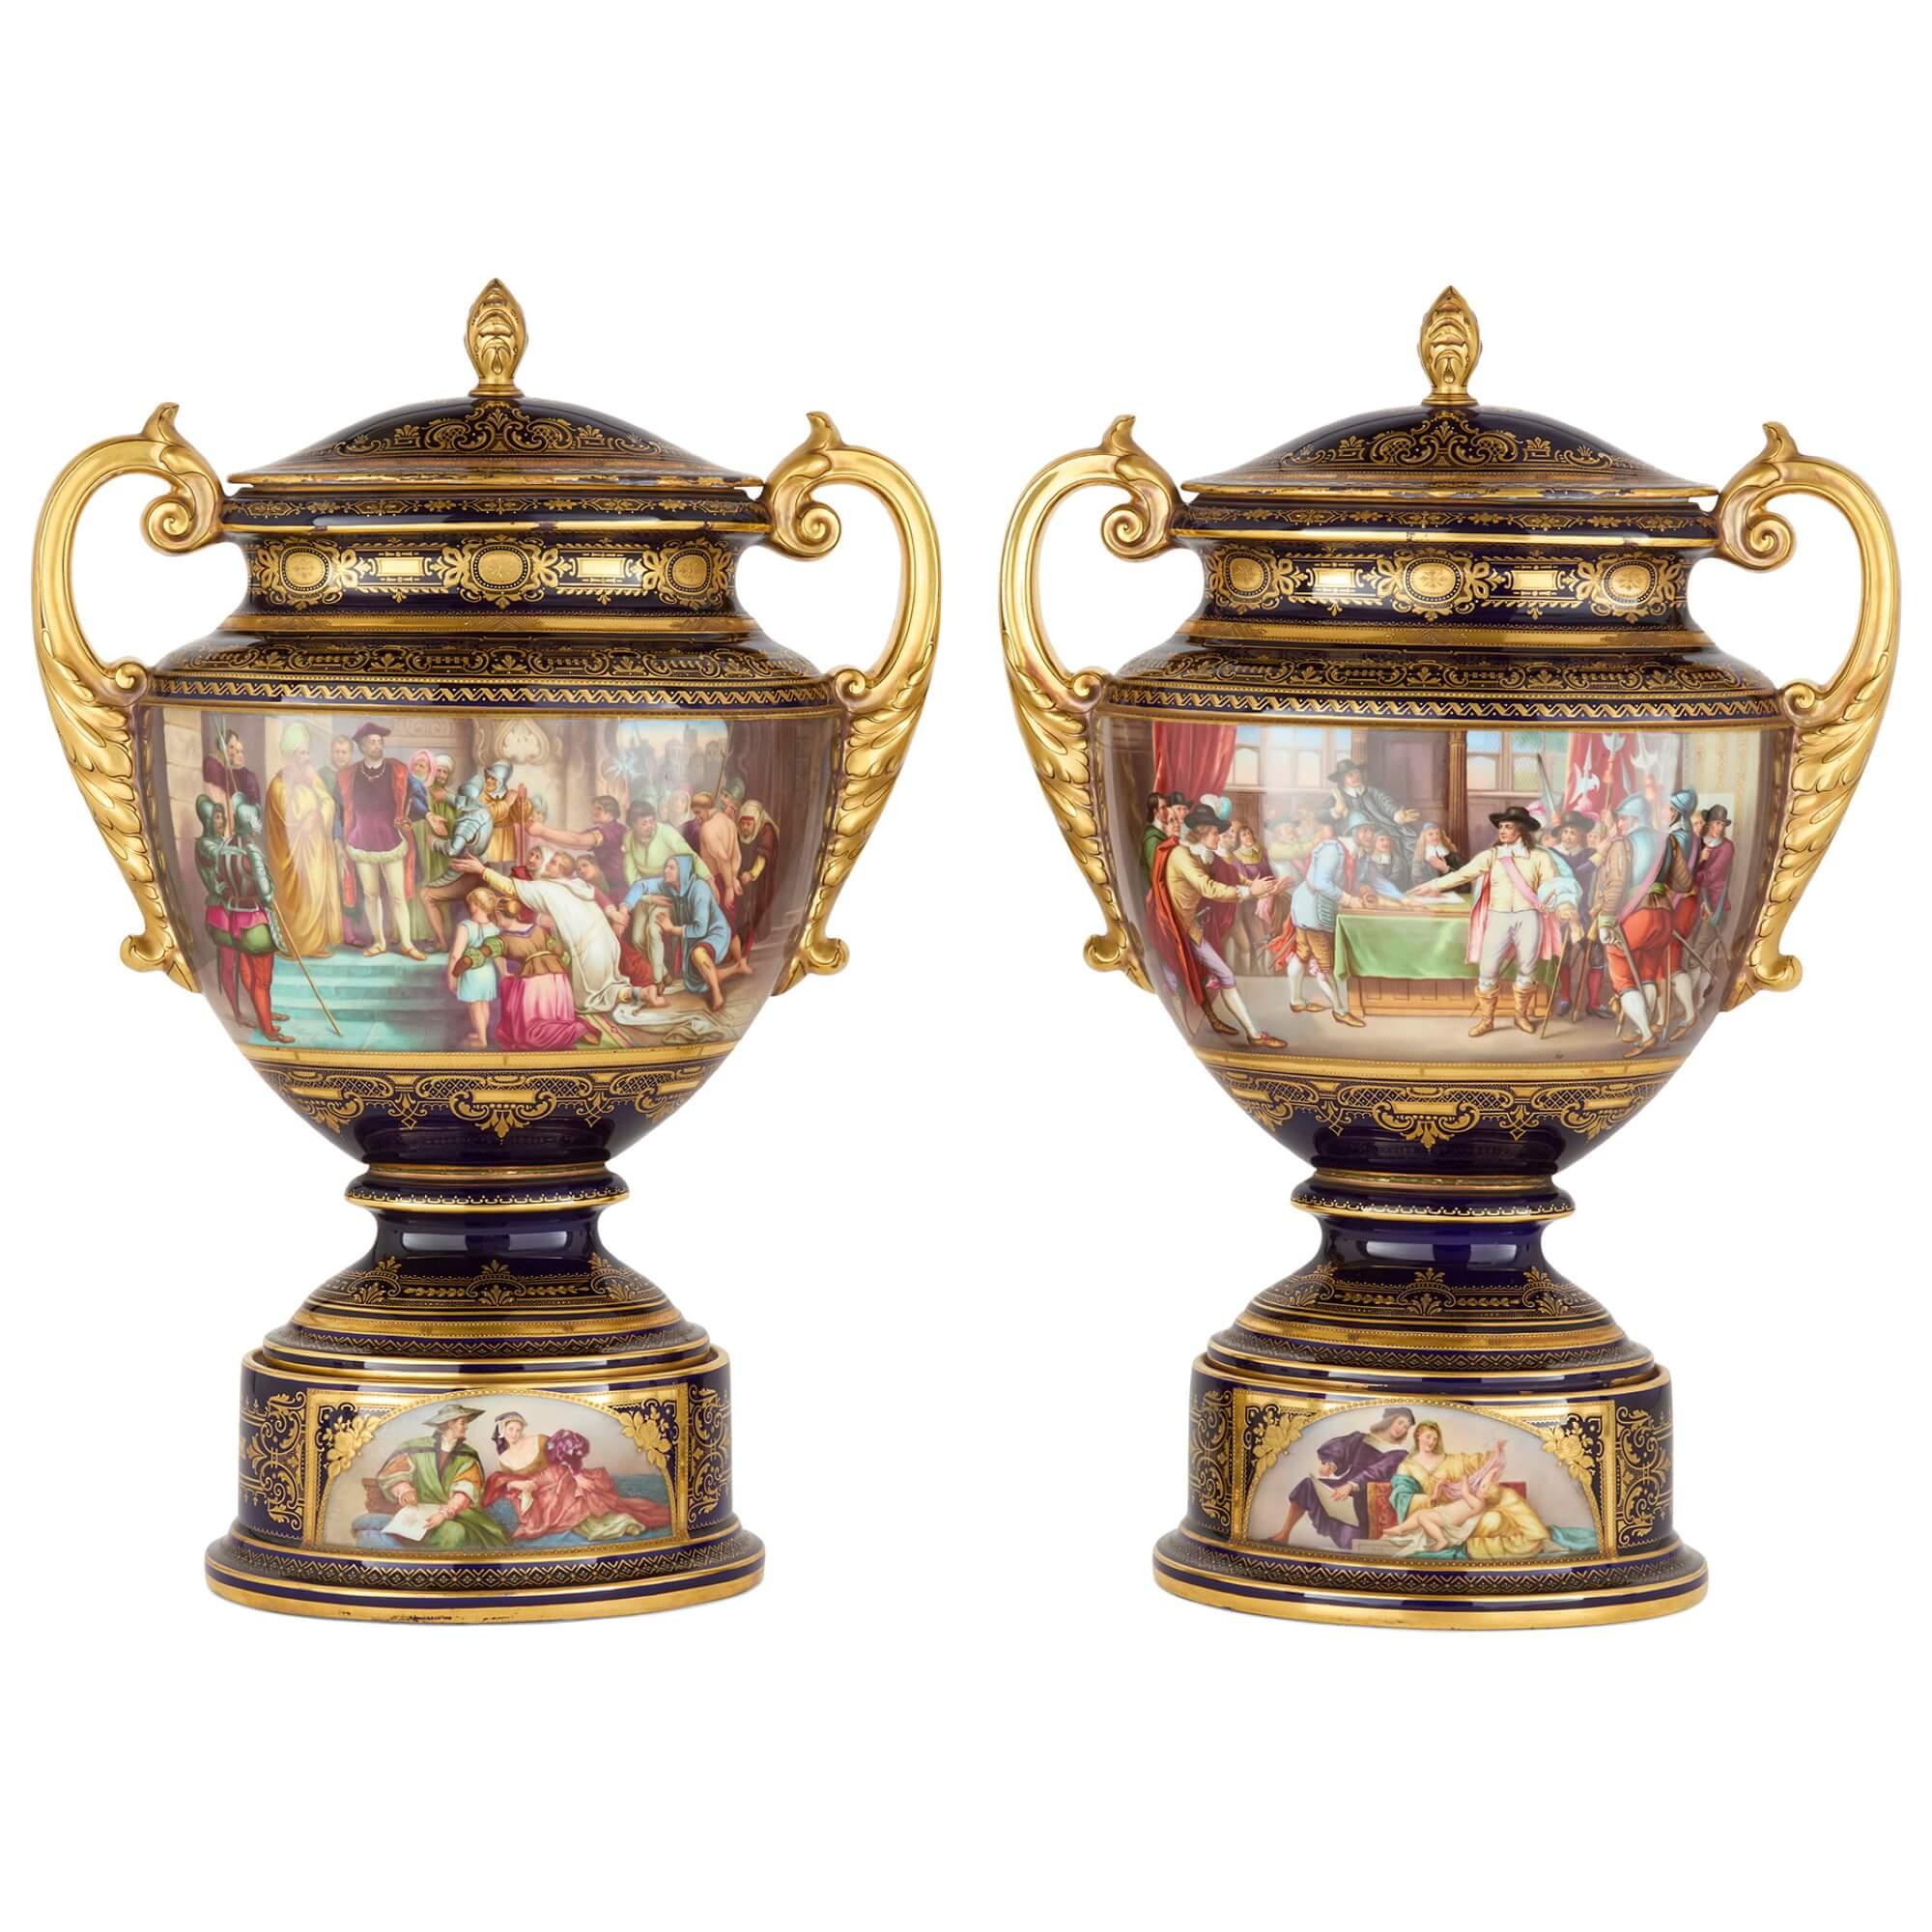 Pair of large lidded Royal Vienna porcelain vases 
Austrian, 19th Century
Height 61cm, width 42cm, depth 19cm

This exceptional pair of vases combine an intriguing form with superb painted decoration.

Of baluster form with an unusually oval